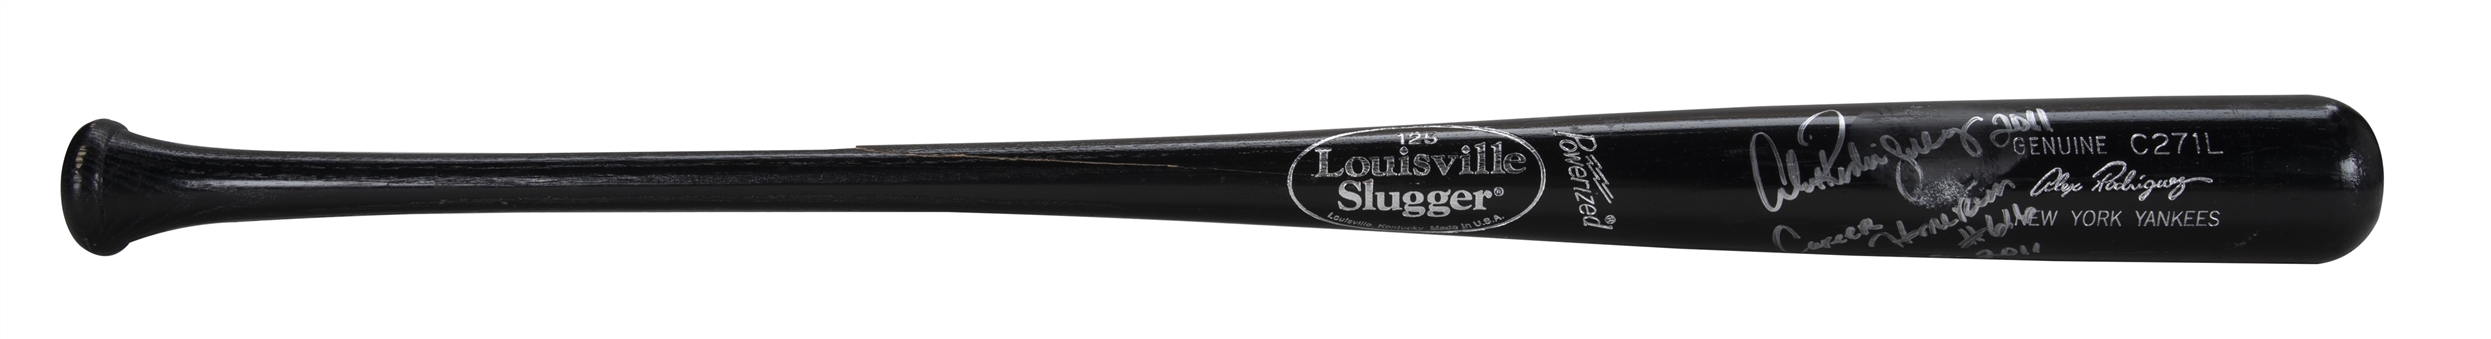 2011 Alex Rodriguez Game Used, Signed & Inscribed Louisville Slugger C271L Model Bat Used On 4/8/11 For Career Home Run #616 (Rodriguez LOA)